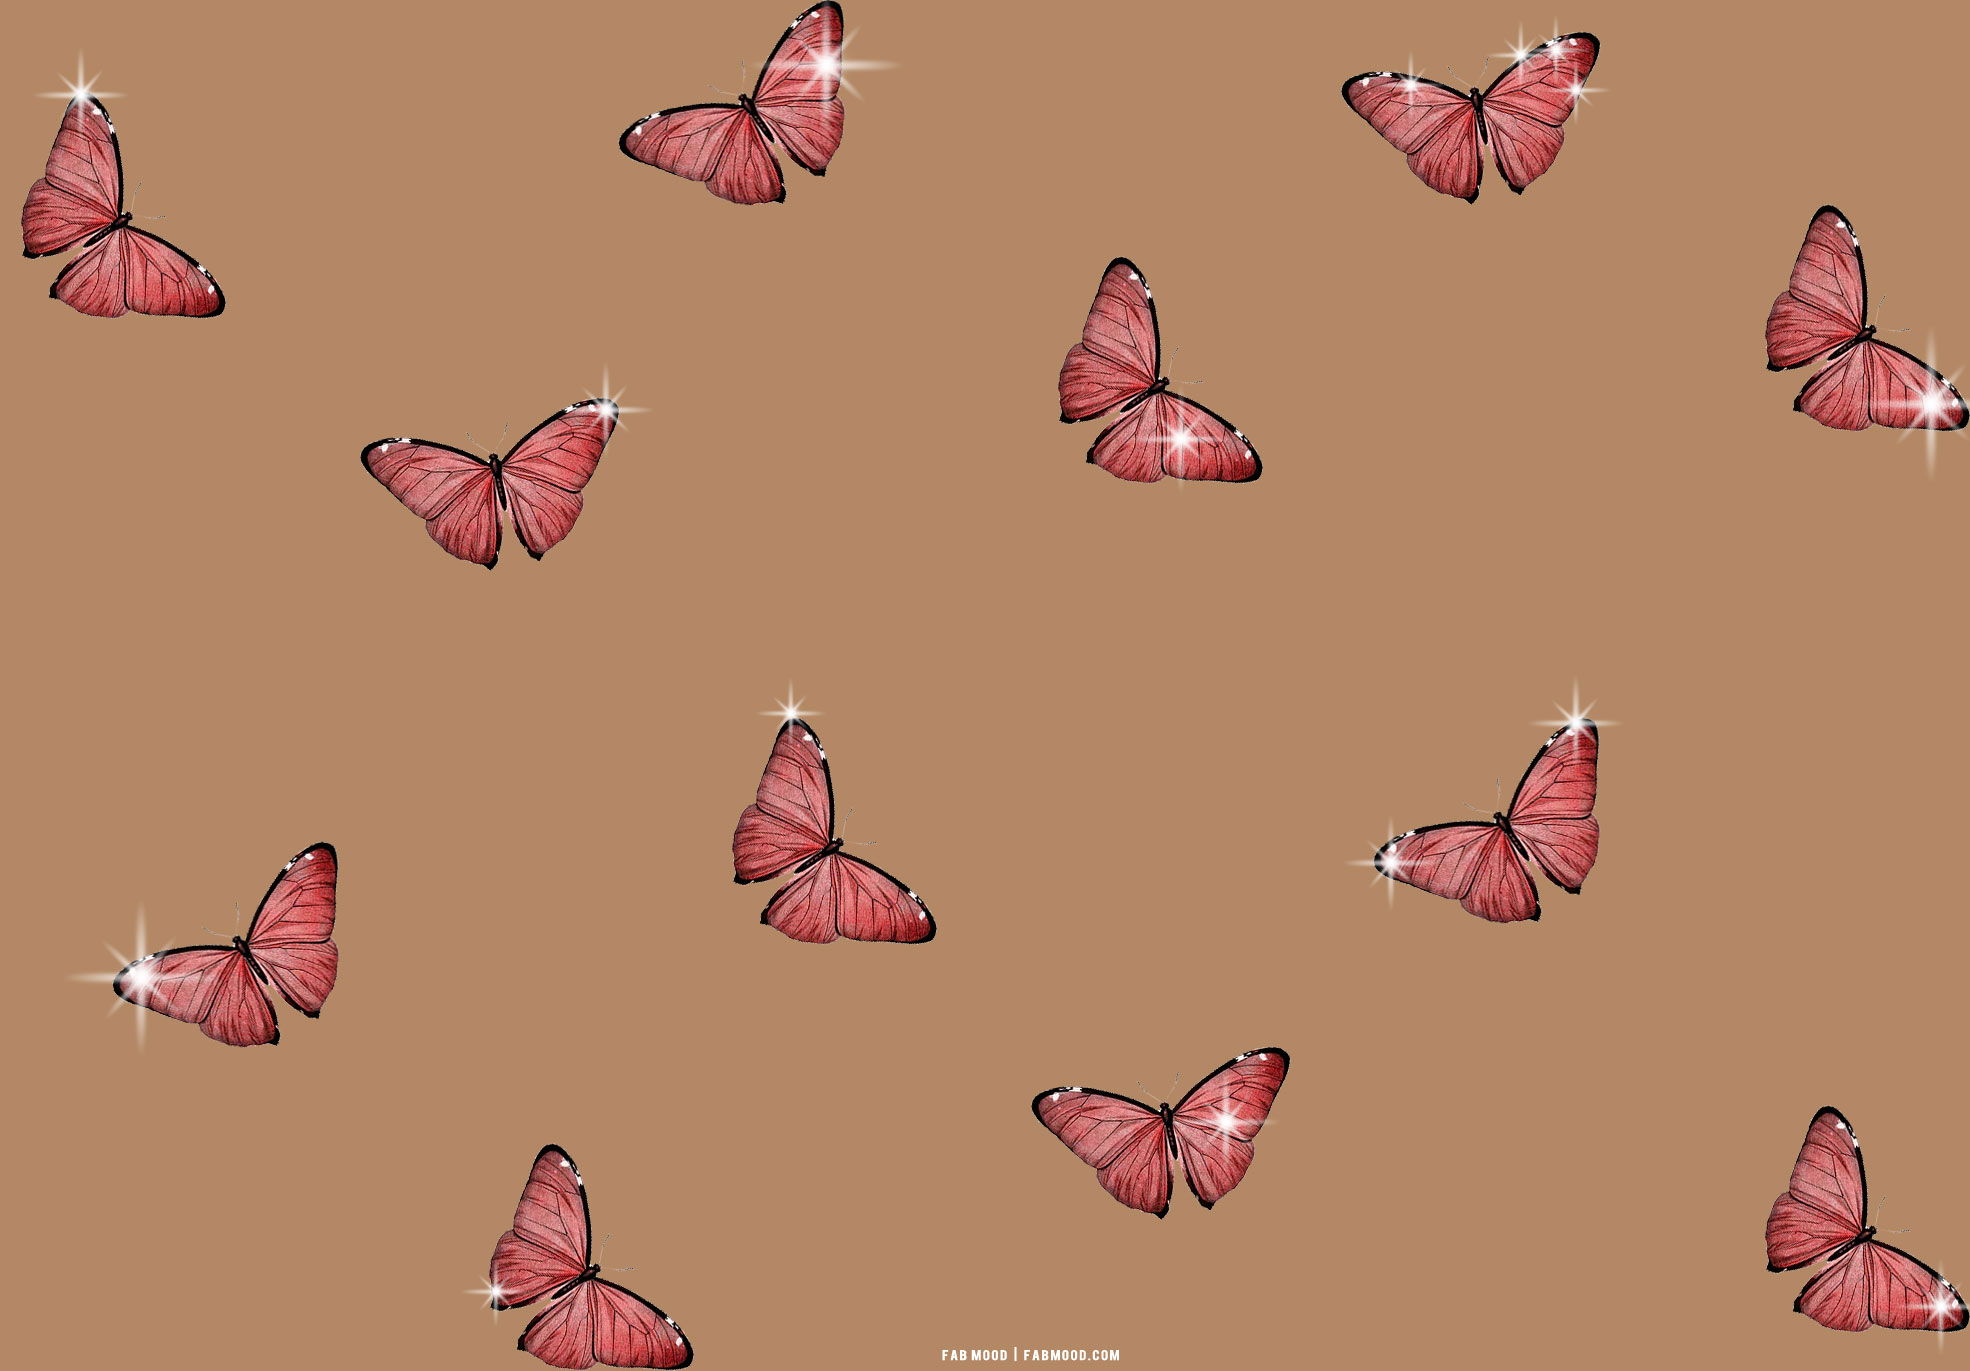 25 Brown Aesthetic Wallpaper for Laptop : Sparkle Butterfly Aesthetic  Background 1 - Fab Mood | Wedding Colours, Wedding Themes, Wedding colour  palettes